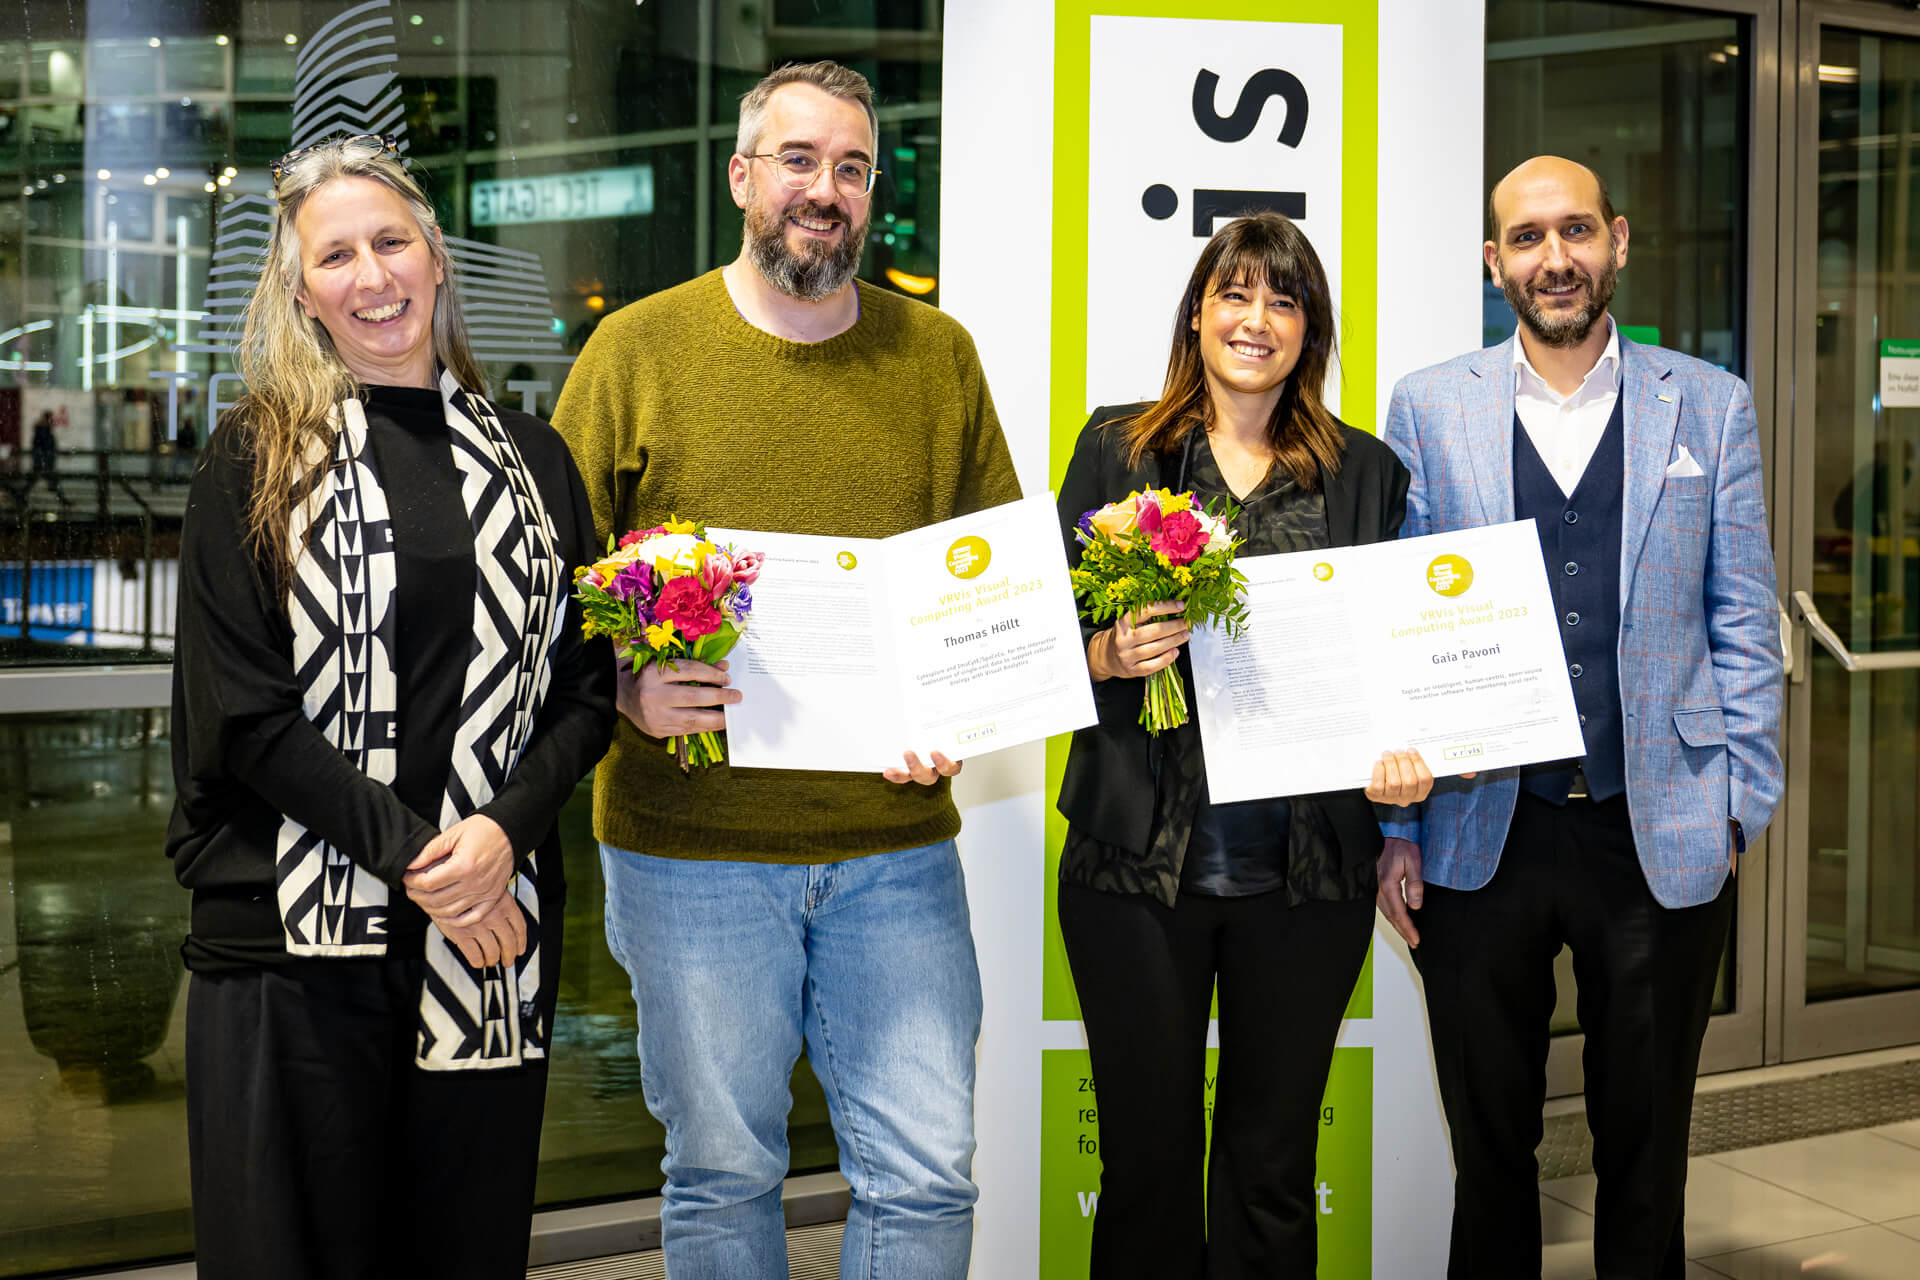 Two award winners with flowers and award certificate in the middle, on the right and on the left the scientific and management of VRVis